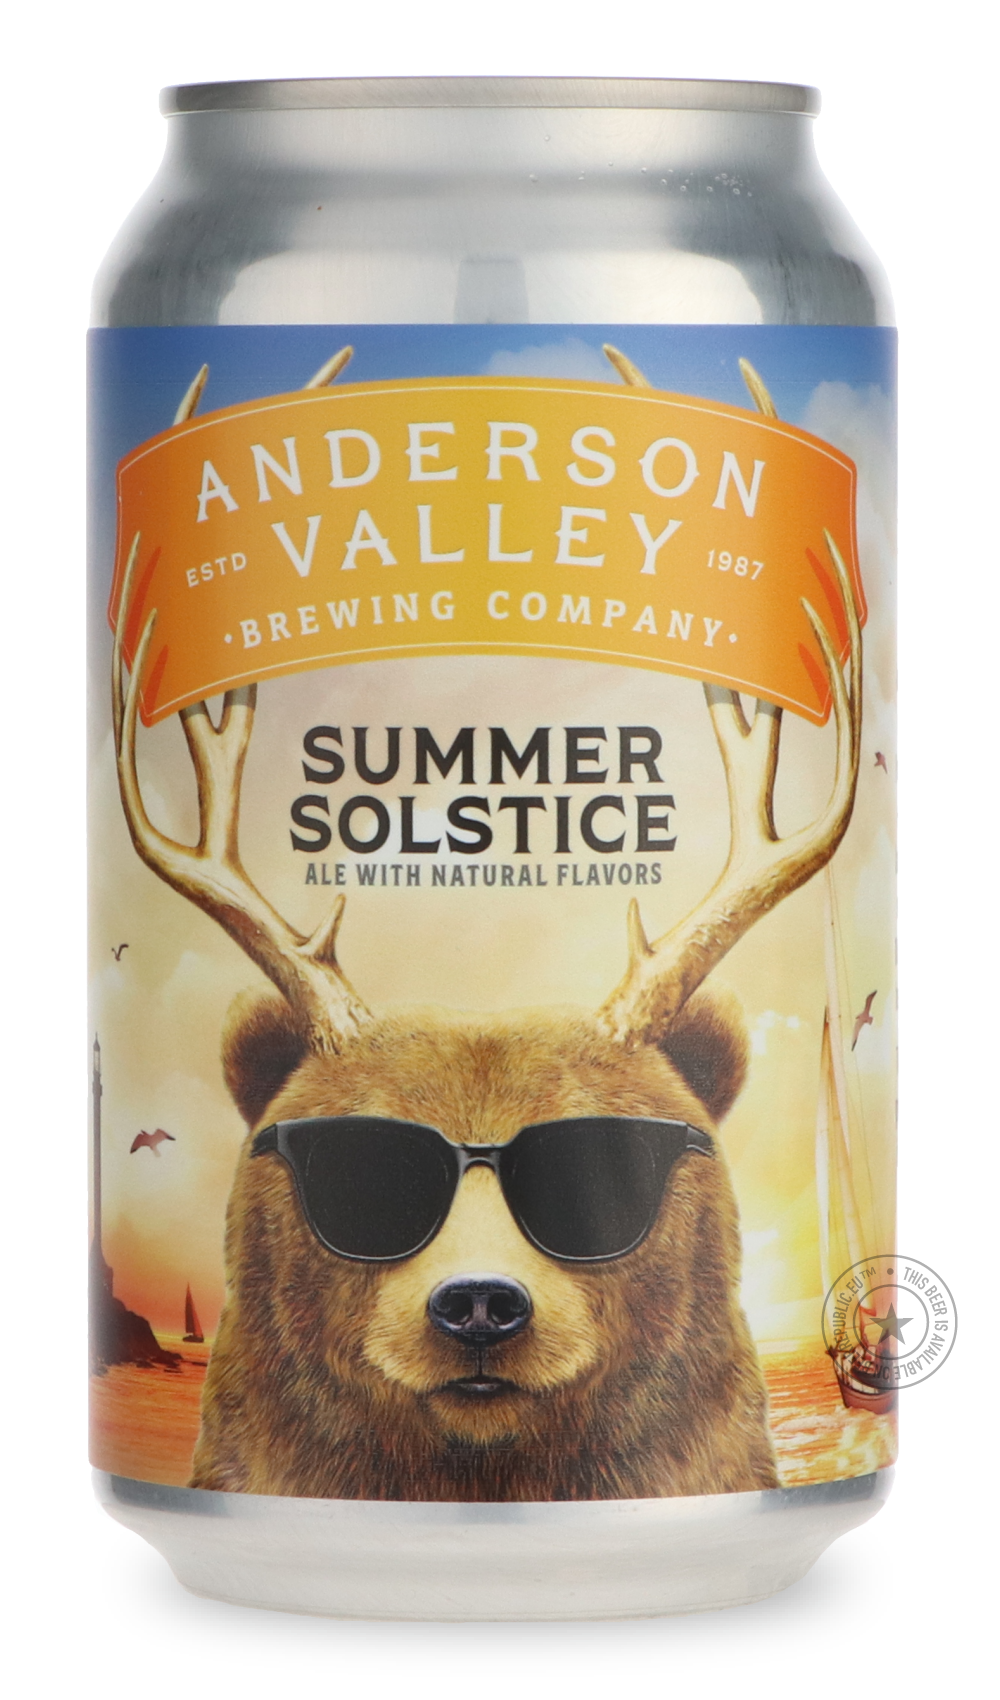 -Anderson Valley- Summer Solstice-Specials- Only @ Beer Republic - The best online beer store for American & Canadian craft beer - Buy beer online from the USA and Canada - Bier online kopen - Amerikaans bier kopen - Craft beer store - Craft beer kopen - Amerikanisch bier kaufen - Bier online kaufen - Acheter biere online - IPA - Stout - Porter - New England IPA - Hazy IPA - Imperial Stout - Barrel Aged - Barrel Aged Imperial Stout - Brown - Dark beer - Blond - Blonde - Pilsner - Lager - Wheat - Weizen - Am